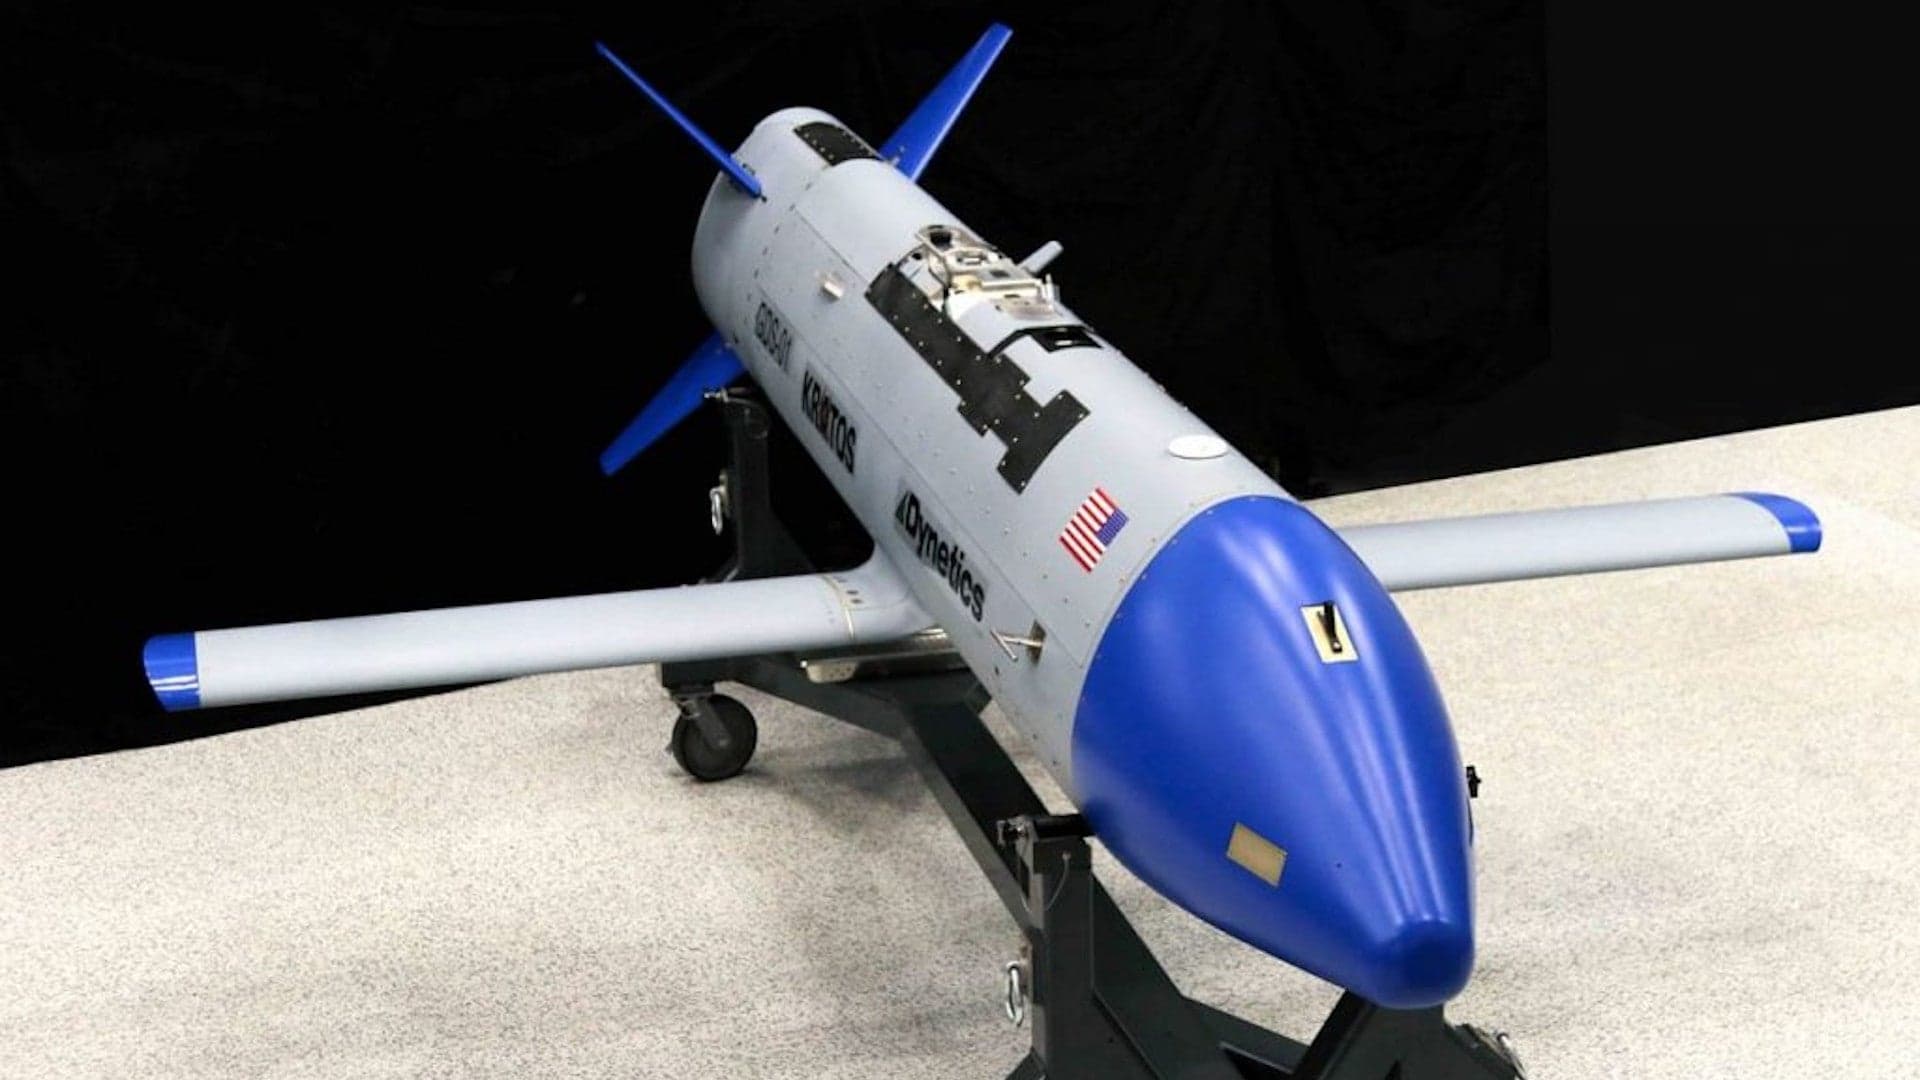 Tests For DARPA’s Gremlins Drones Are All Laid Out But May Be Headed To New Venue